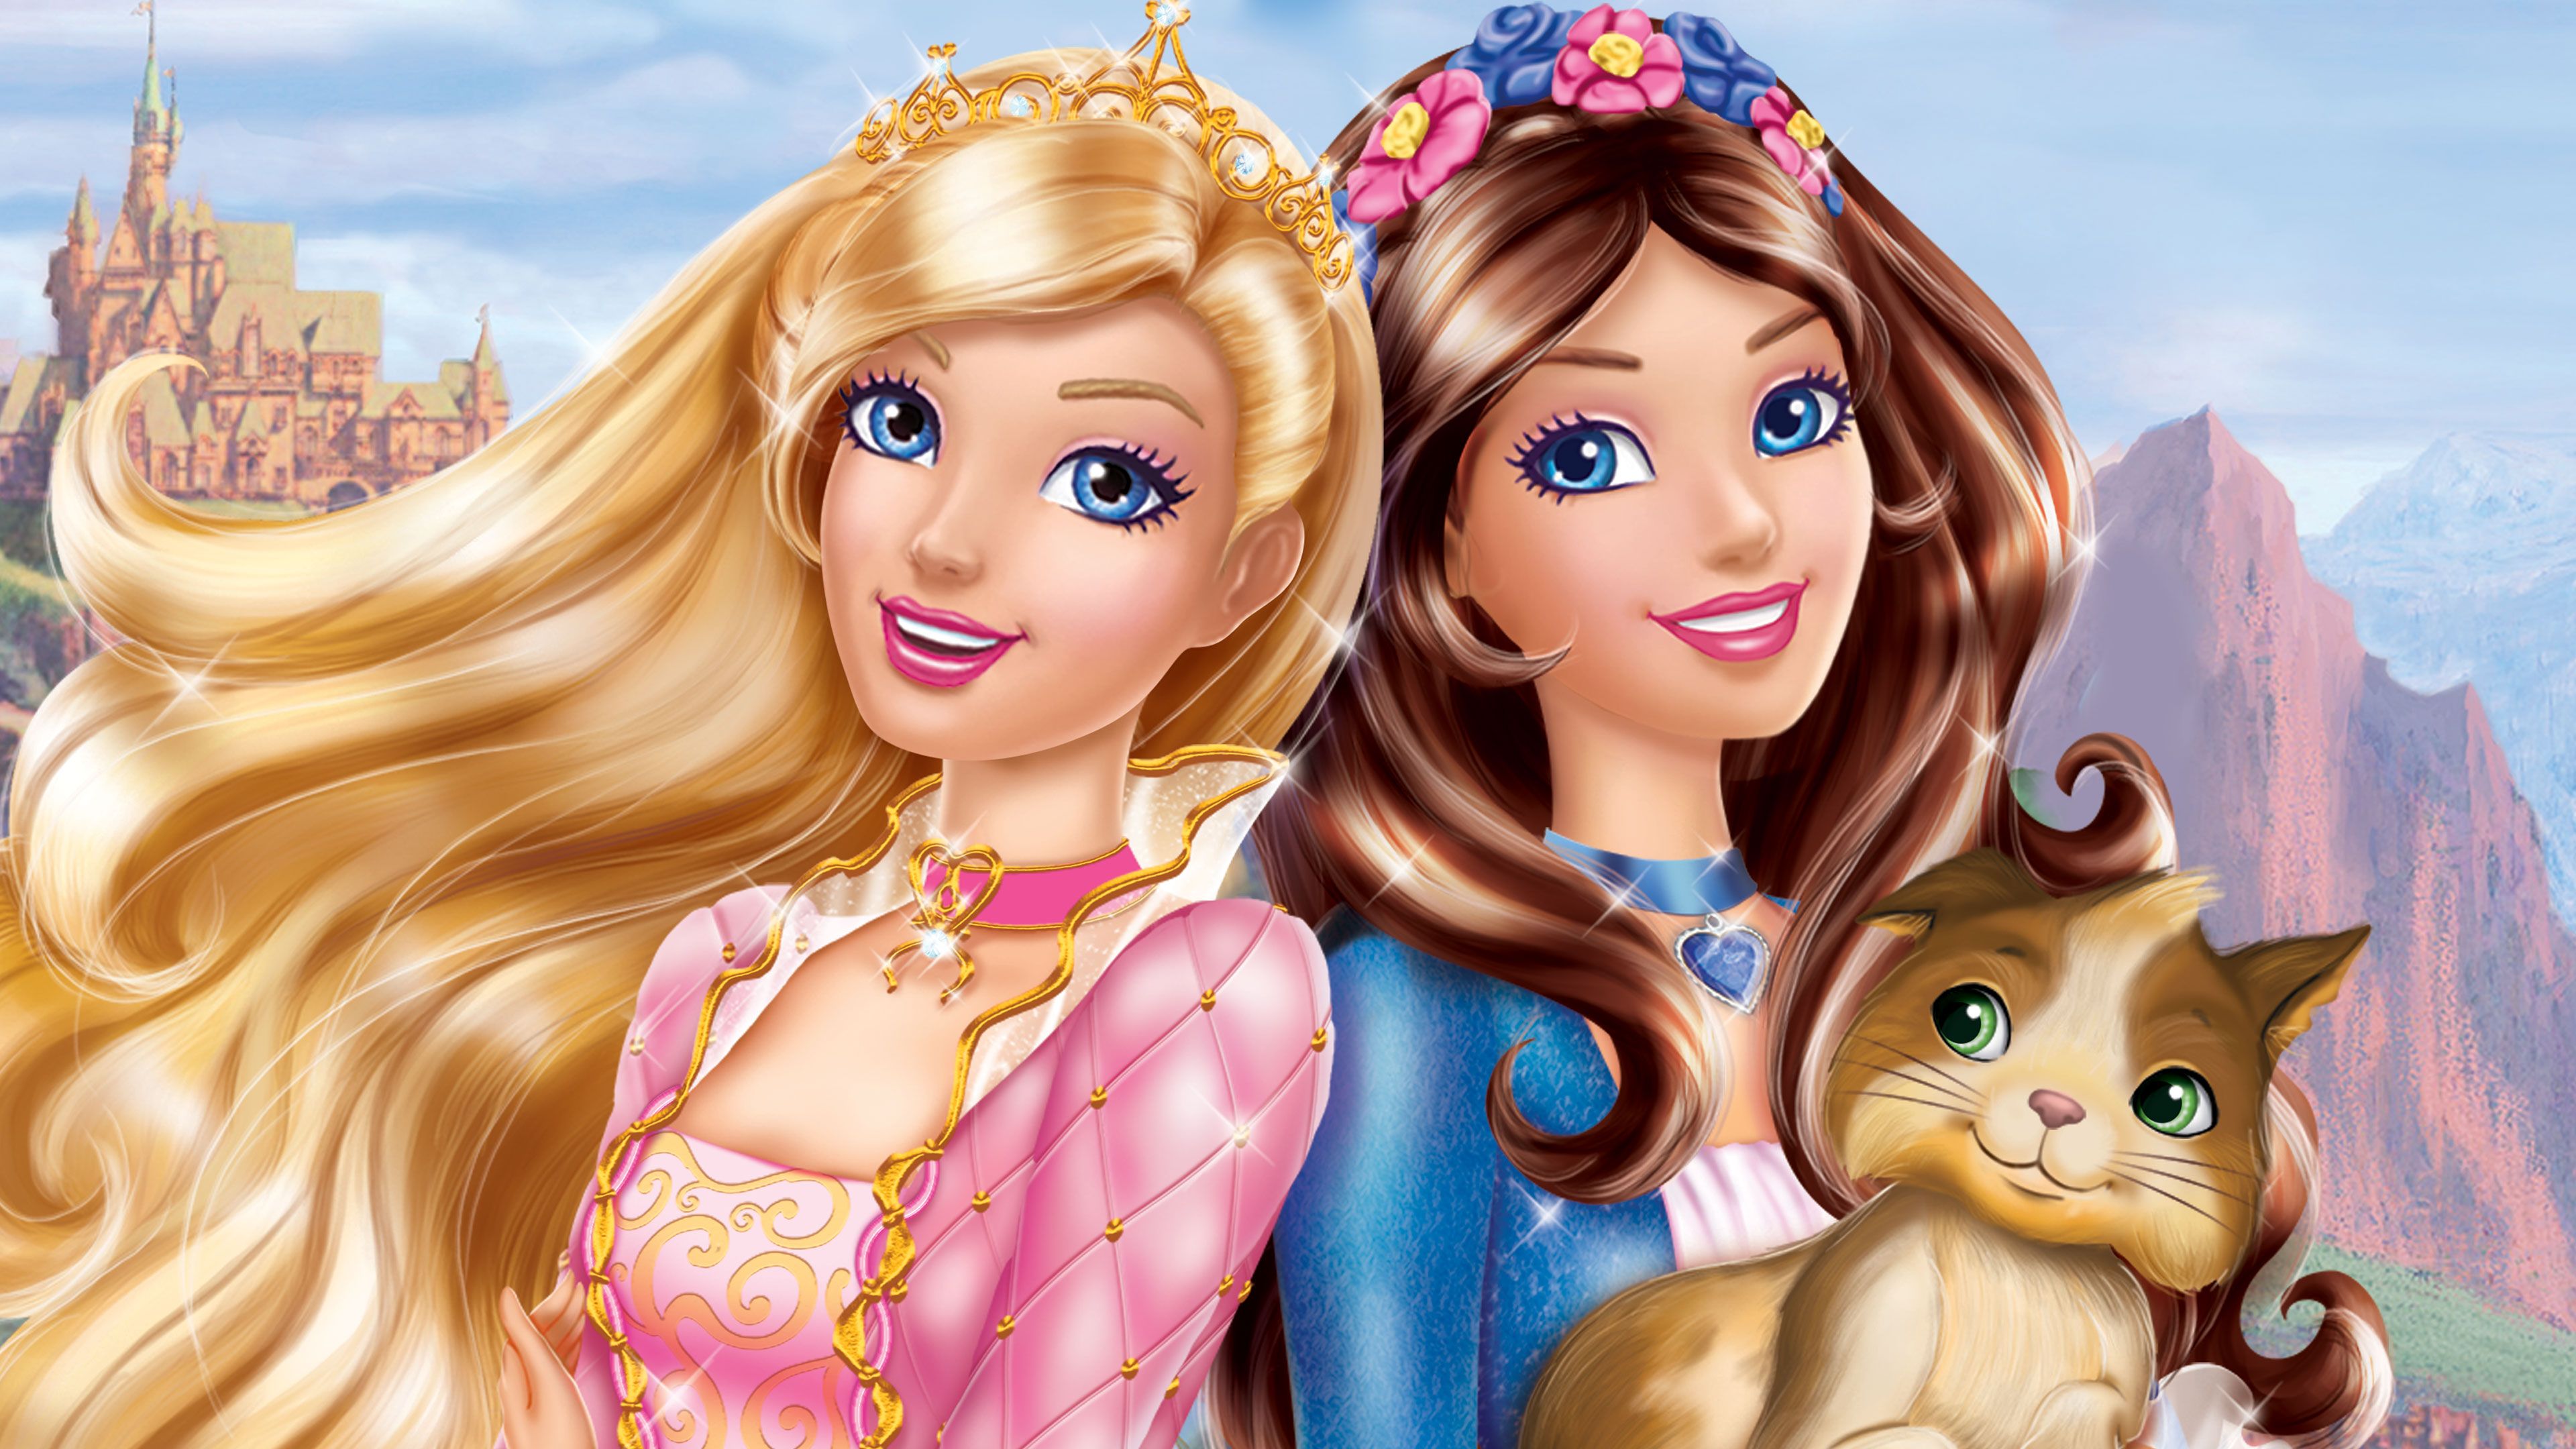 Purchase Barbie as The Princess and the Pauper on digital and stream instan...